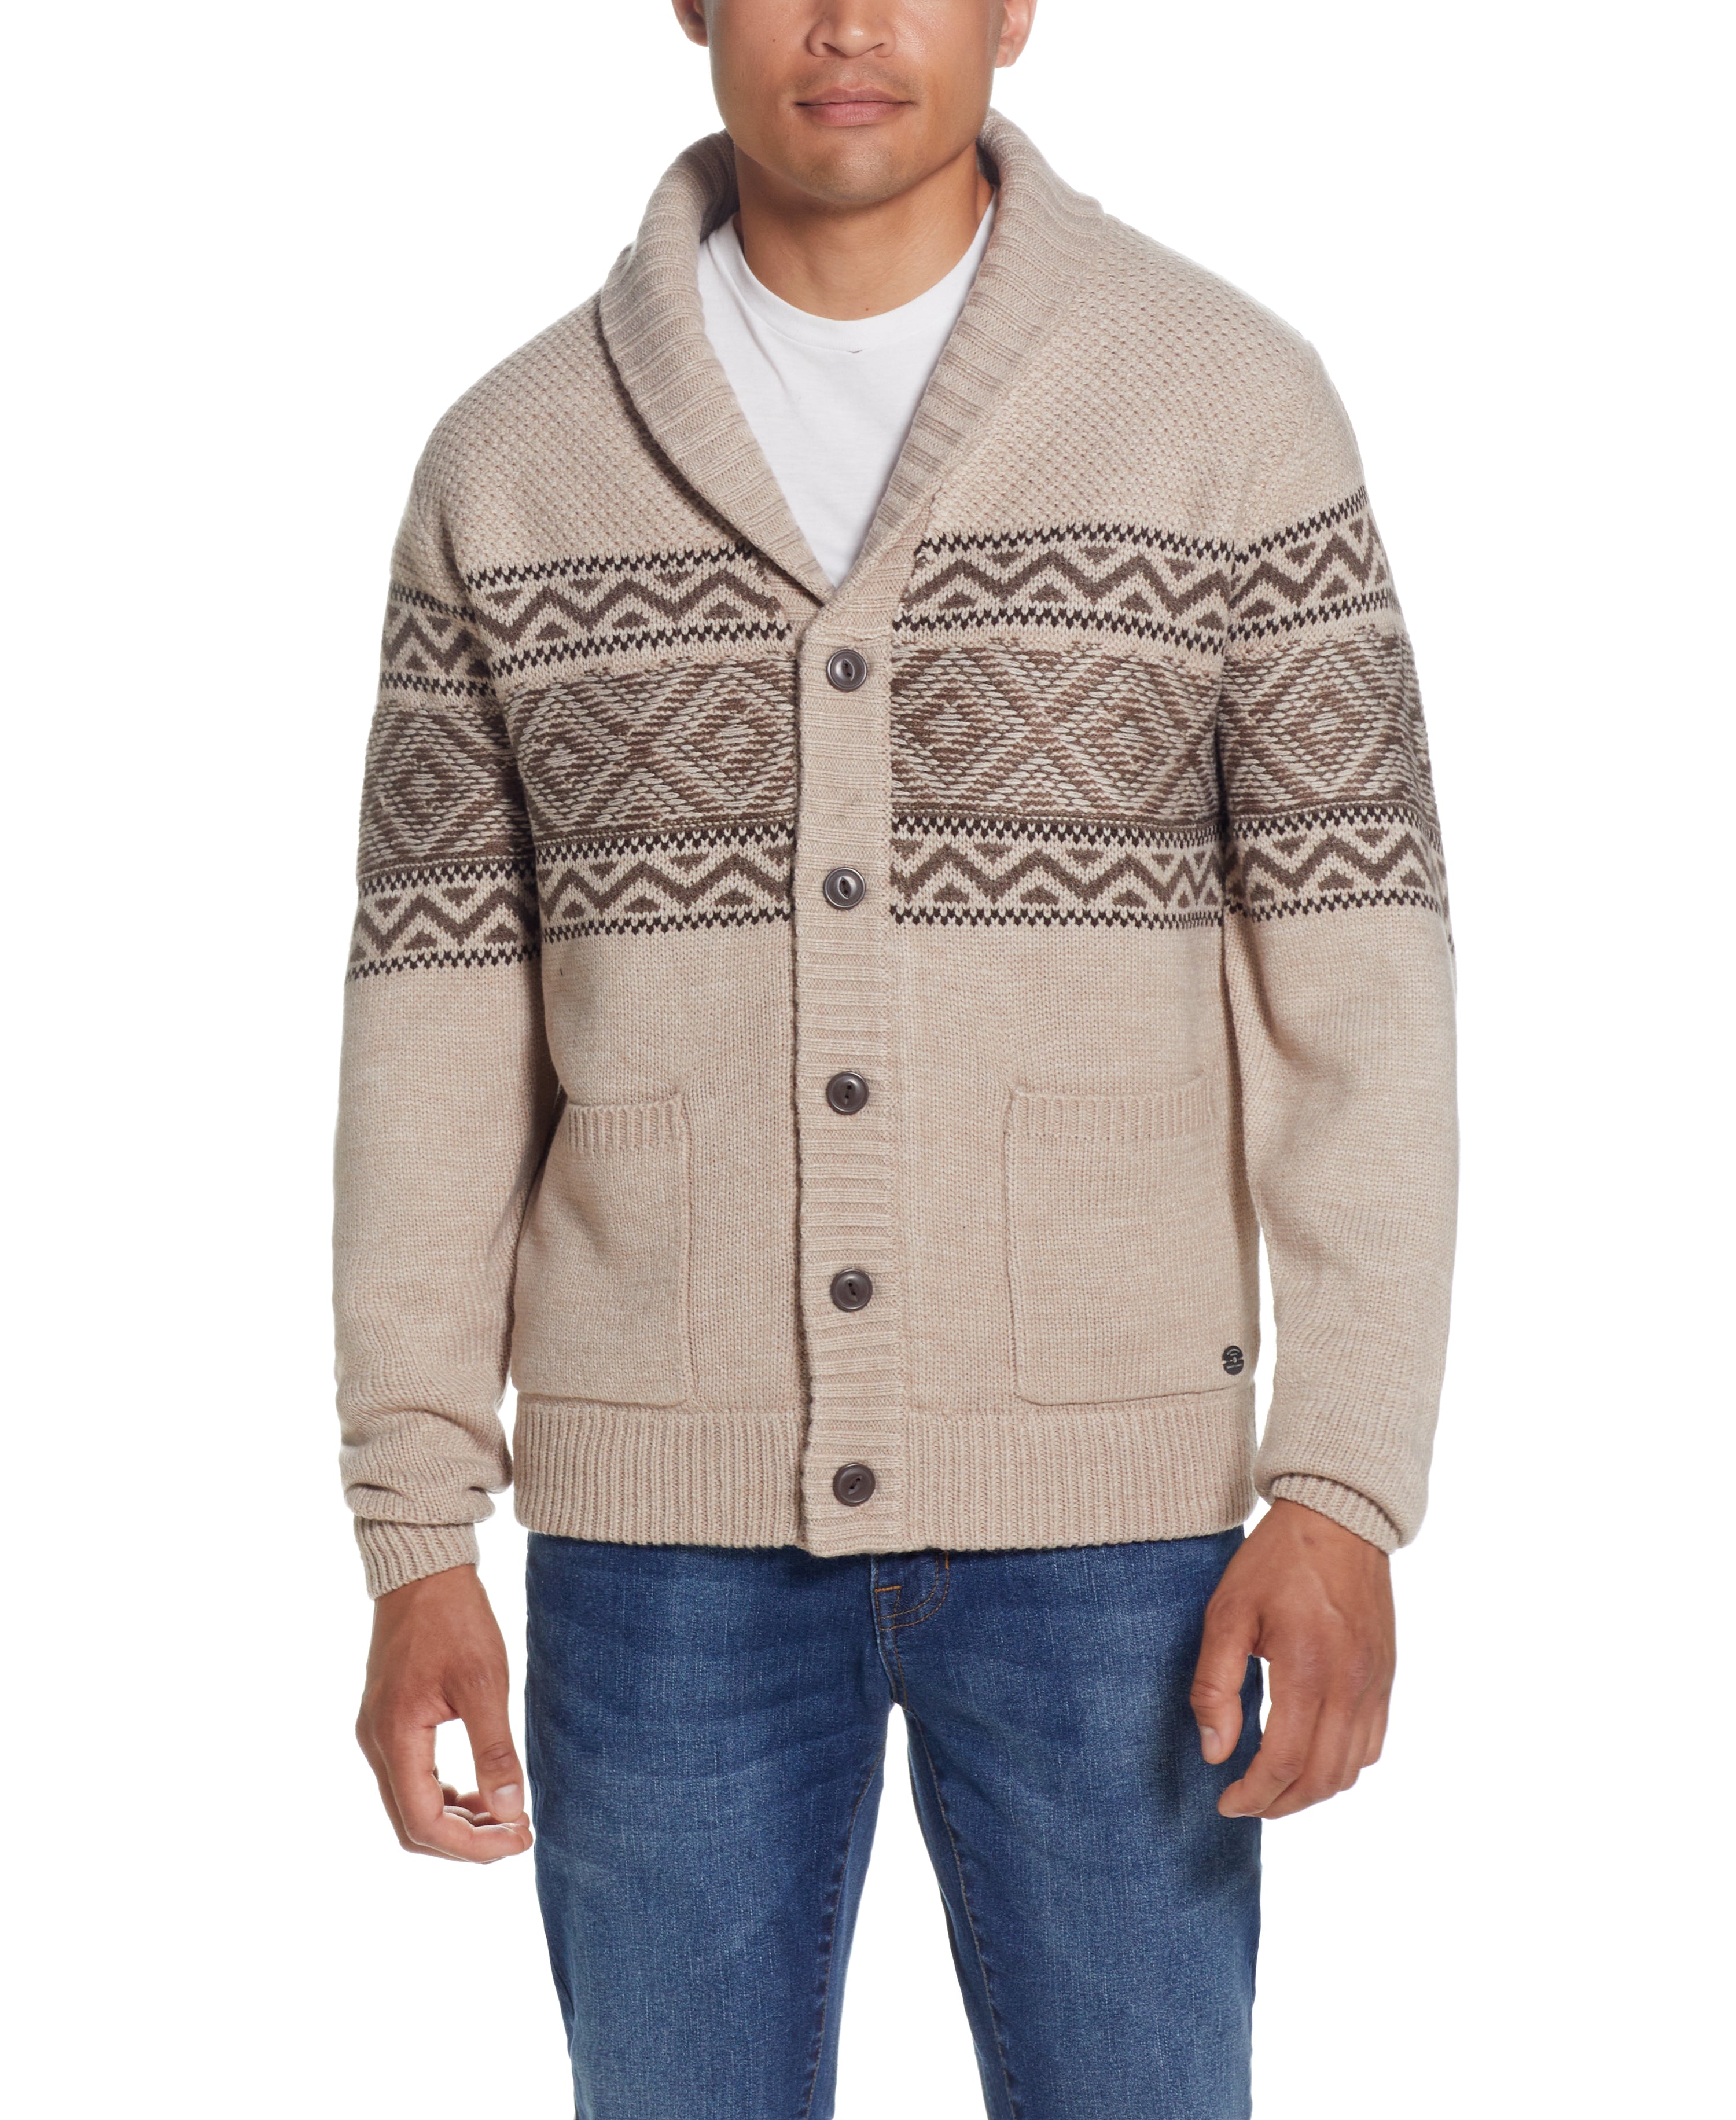 JACQUARD SHERPA LINED BD SWEATER JACKET in PARCHMENT HEATHER